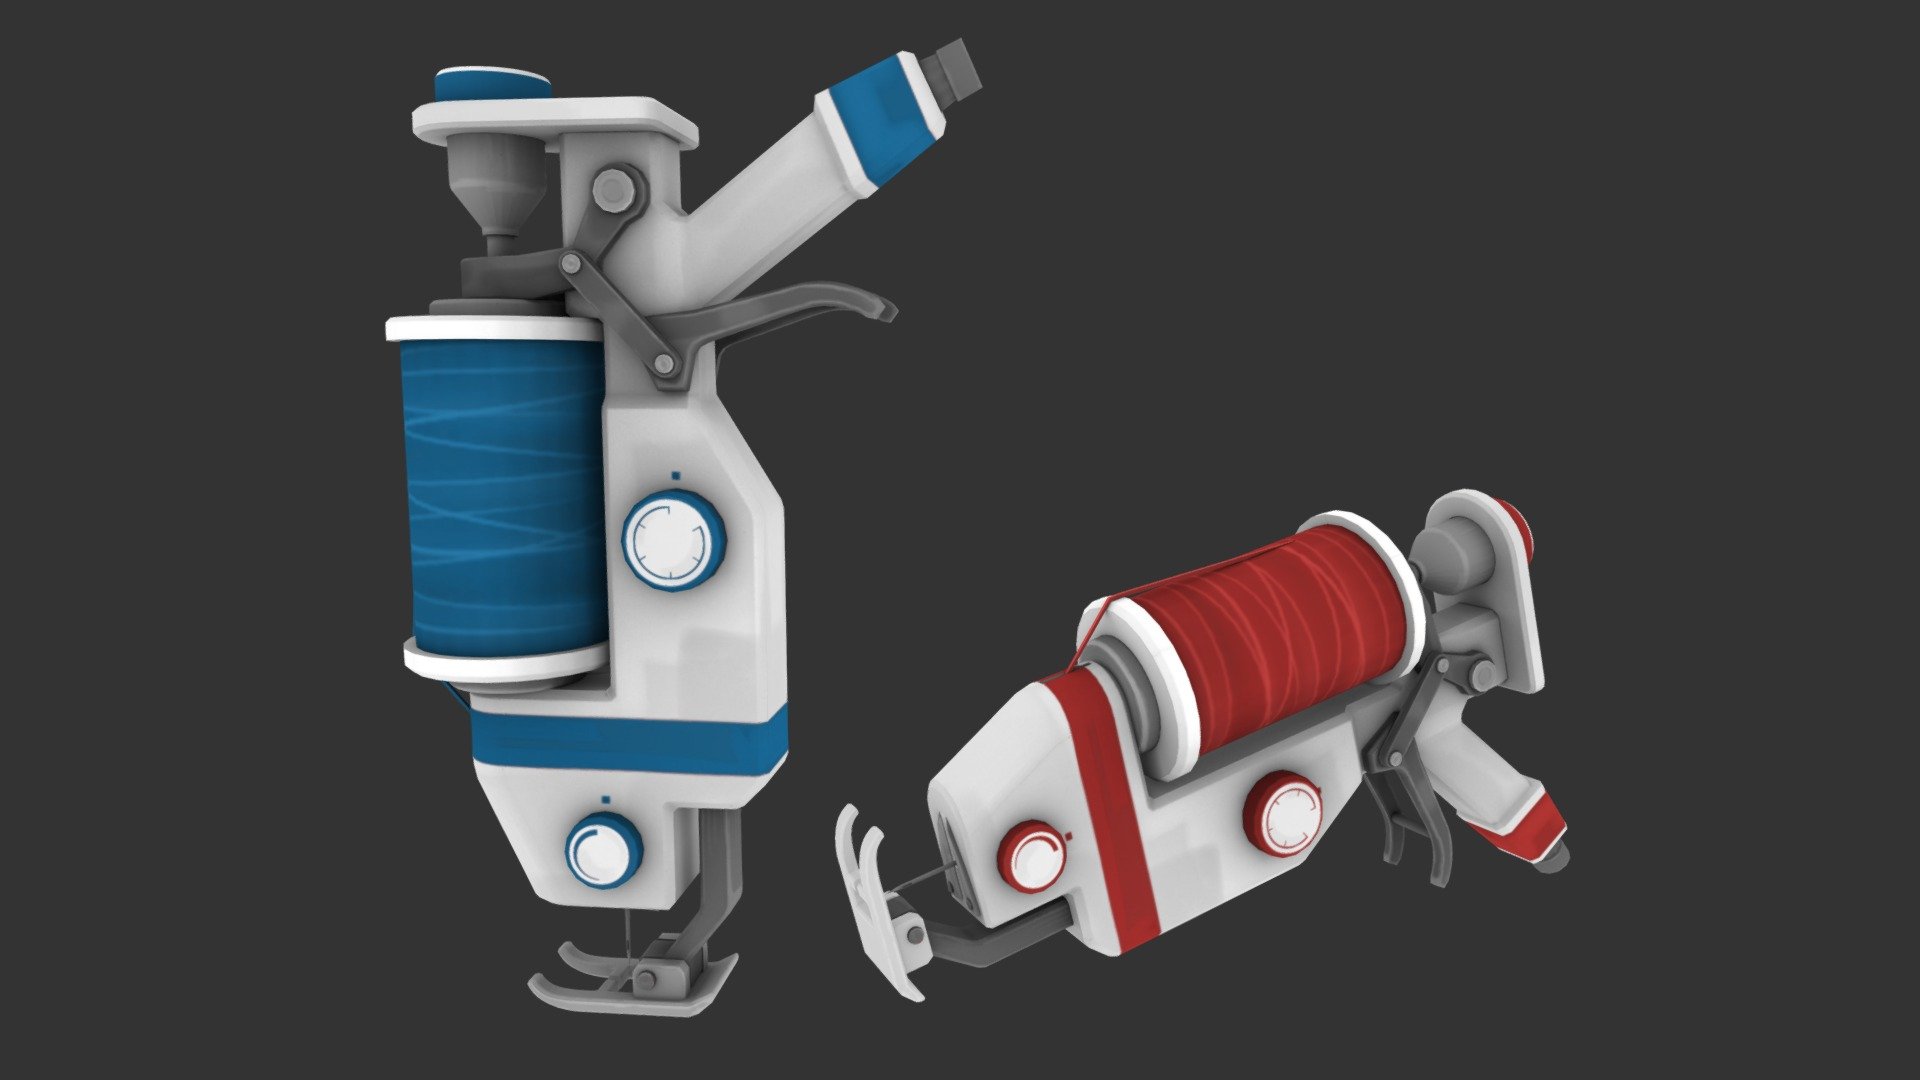 Reap what you sew.
From the Team Fortress 2 Workshop 3d model